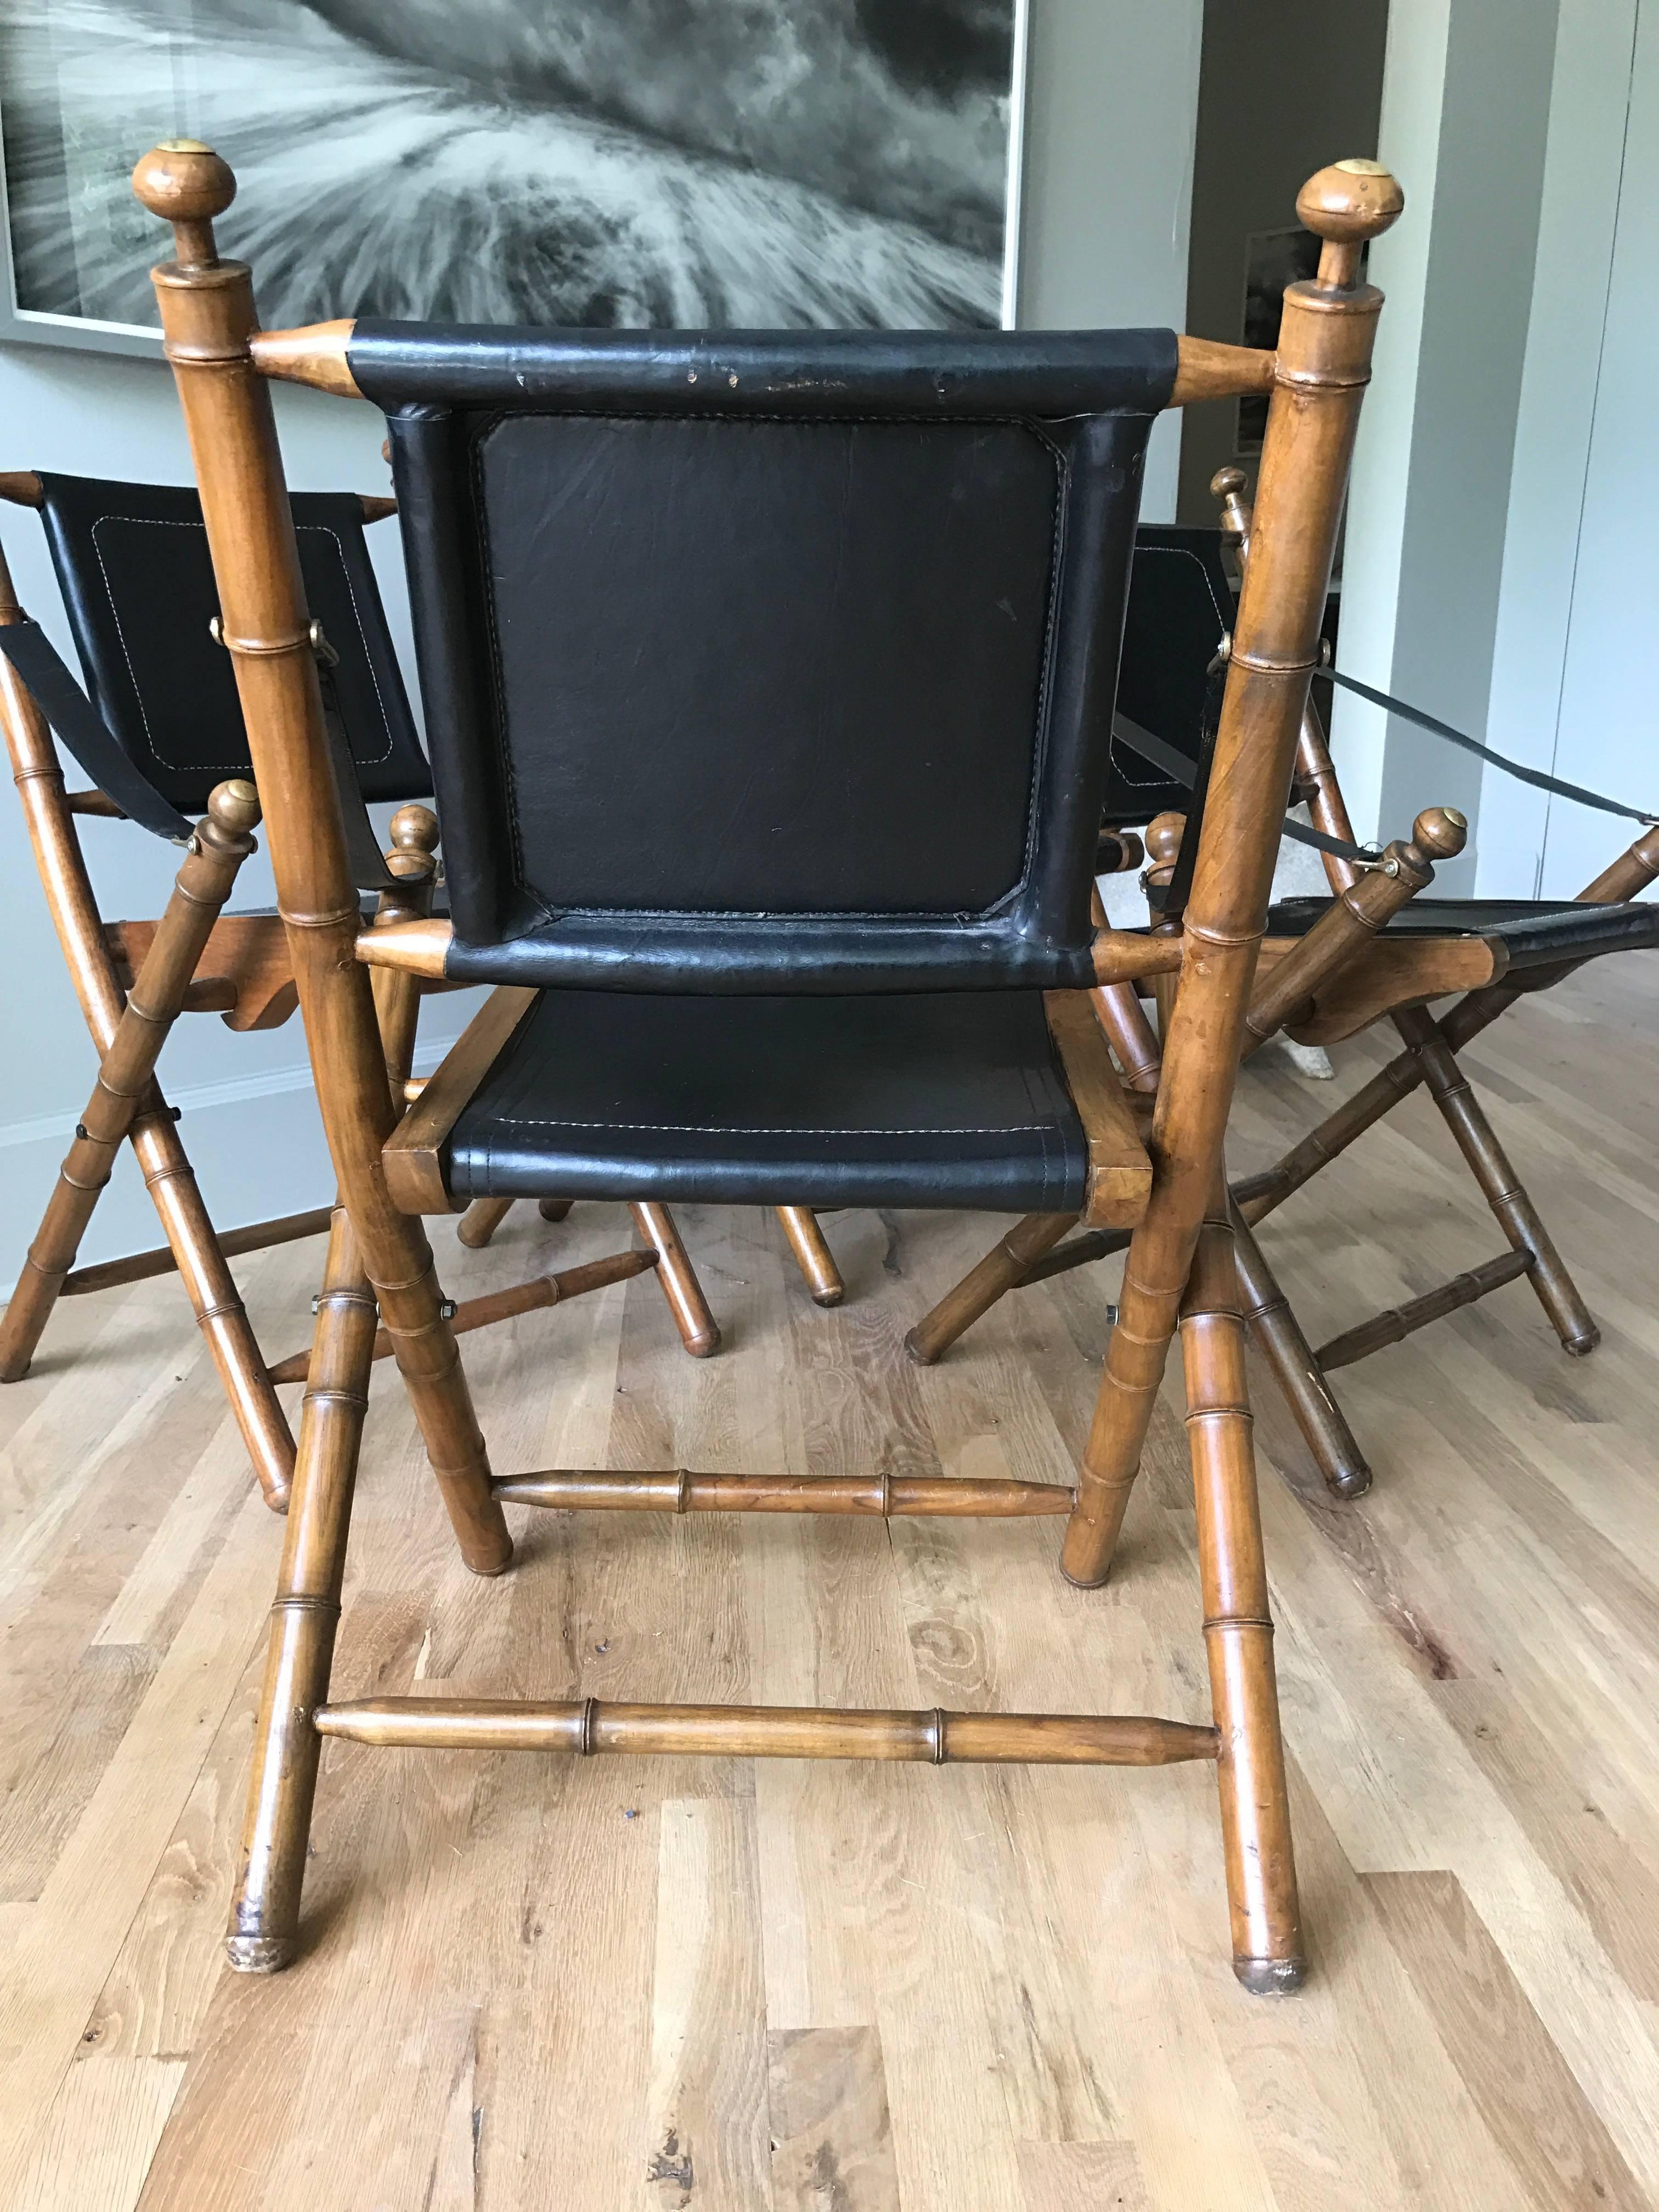 1900s chairs